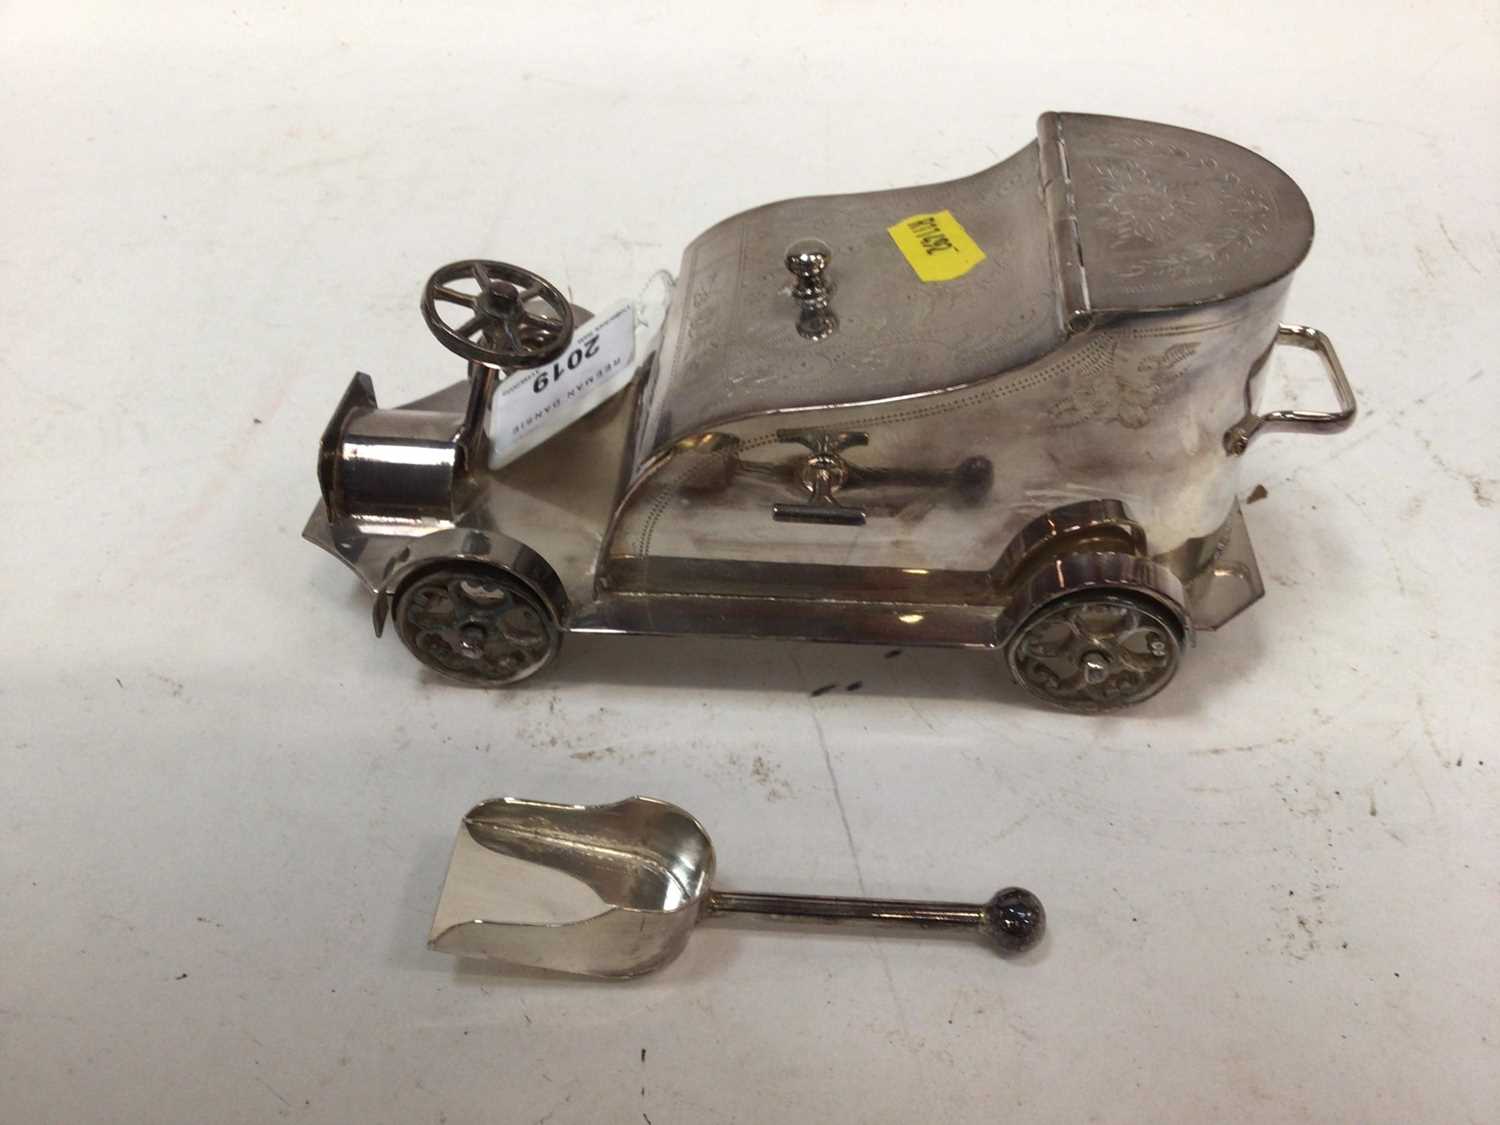 Lot 2019 - Early 20th century silver plated sugar bowl or caddy in the form of a vintage car with engraved decoration, marked to underside 'Superior Electro plated, made in England'; 18cm in length.